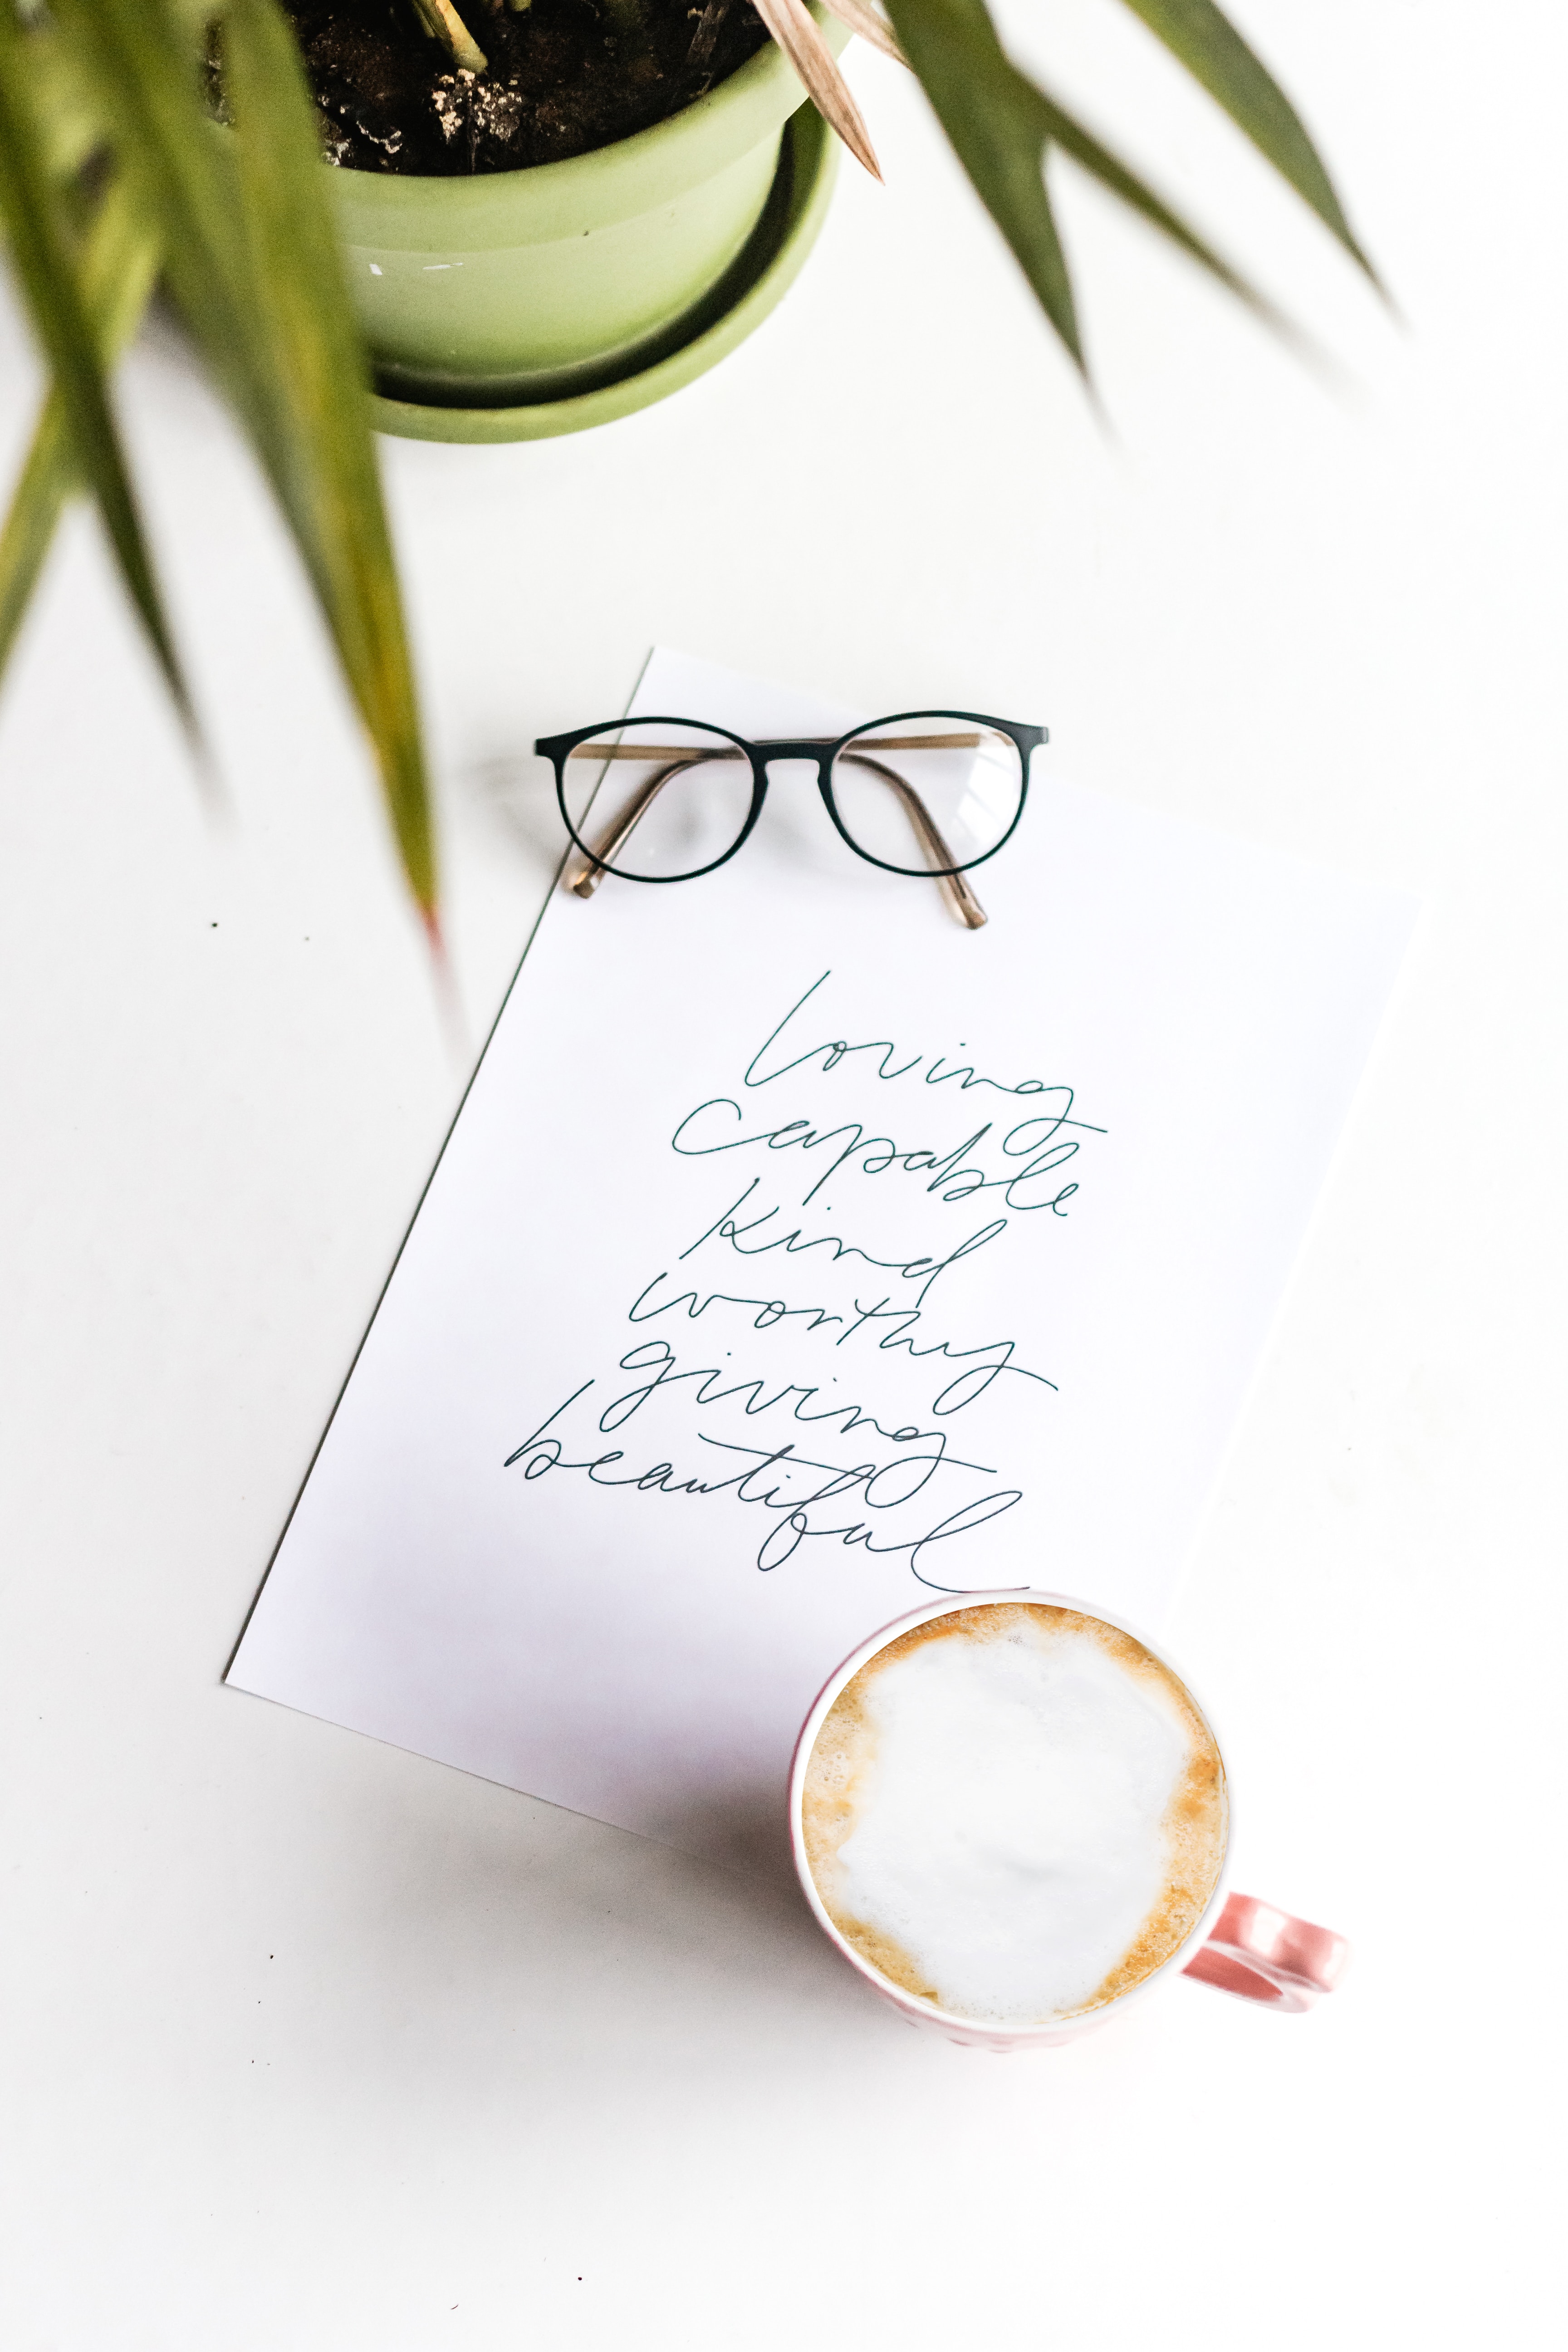 words, cup, inscription, text, paper, glasses, spectacles Smartphone Background